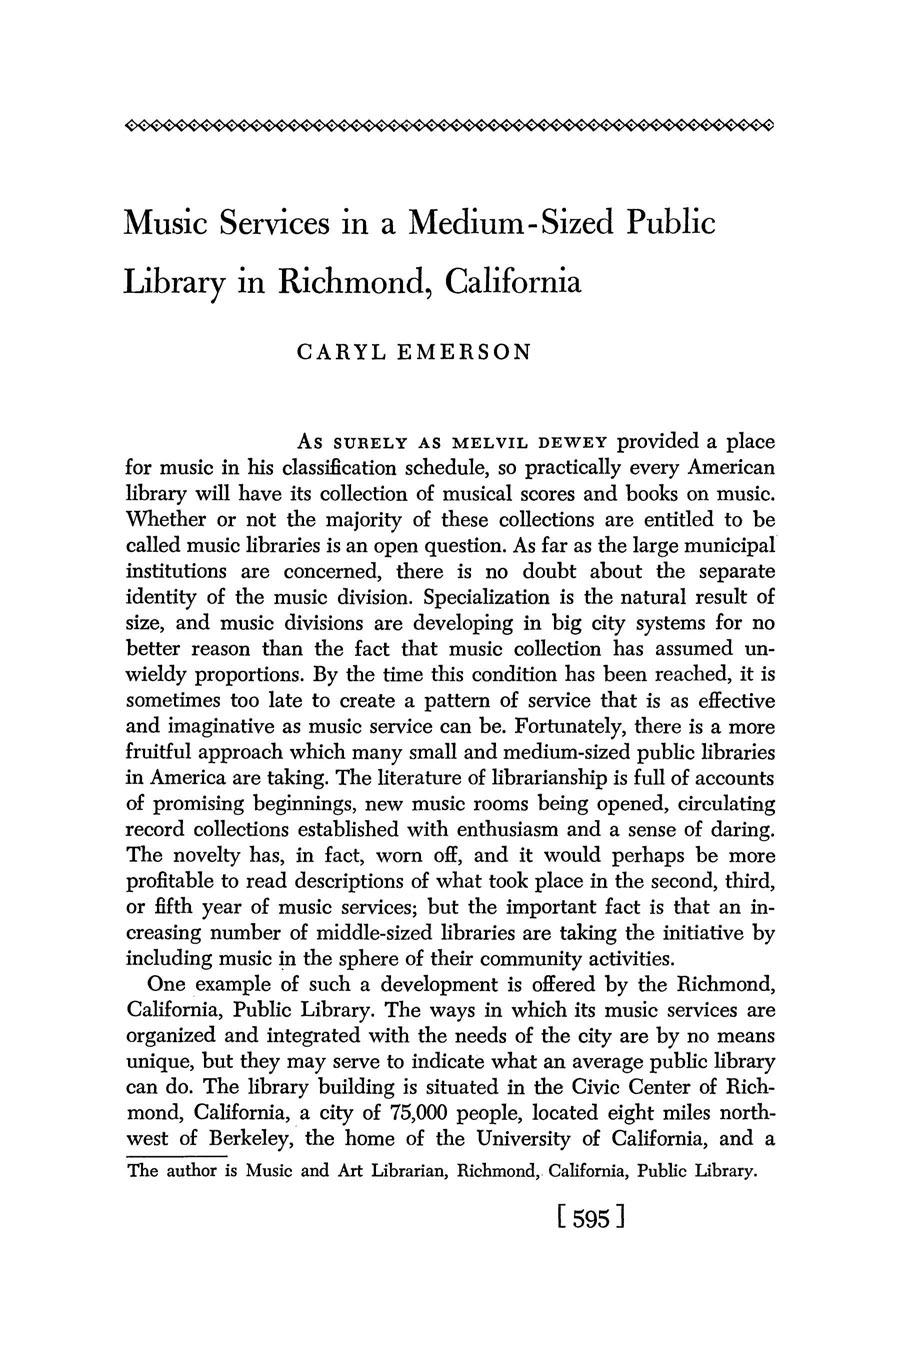 Music Services in a Medium-Sized Public Library in Richmond, California CARYL EMERSON As SURELY AS MELVIL DEWEY provided a place for music in his classi6cation schedule, so practically every American